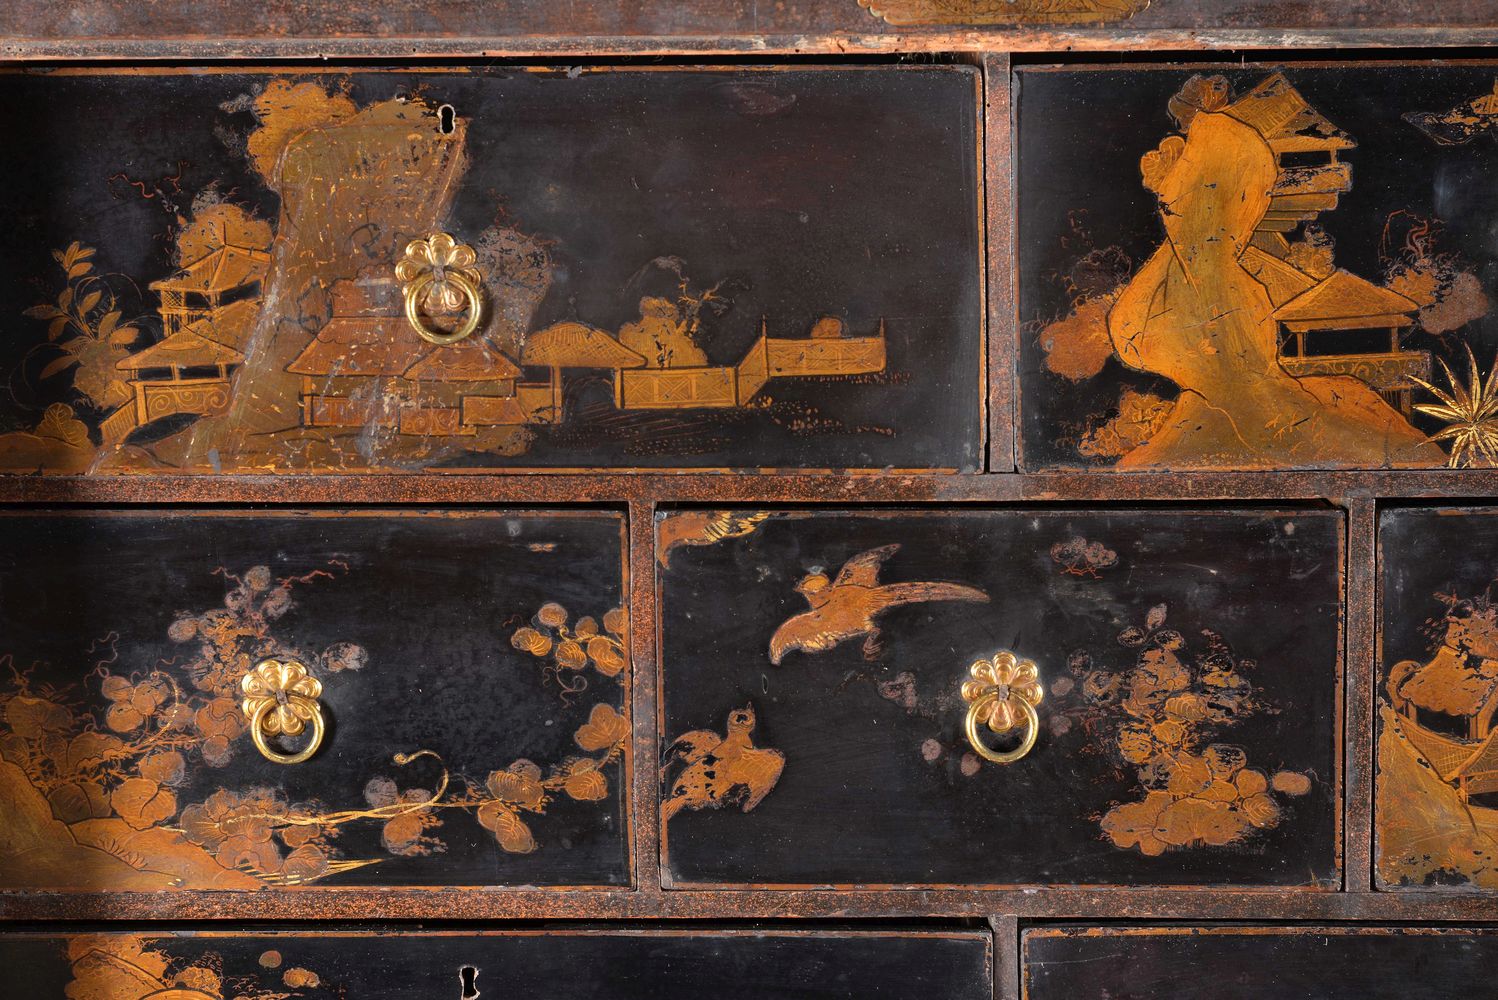 A black lacquer and gilt chinoiserie decorated cabinet on stand - Image 5 of 5